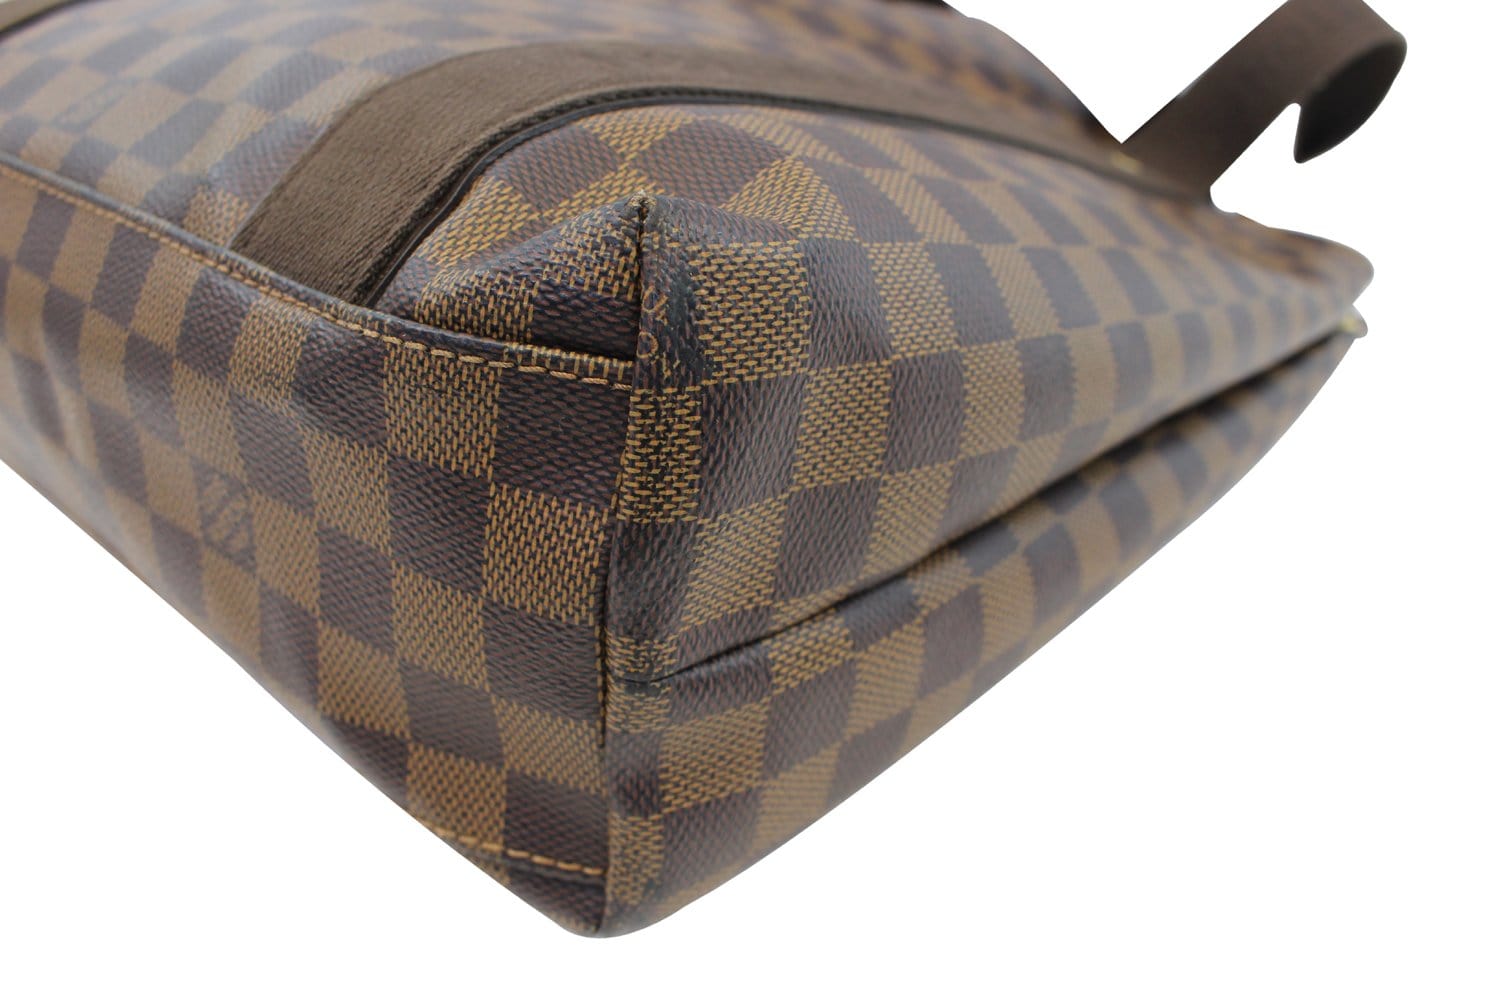 SB Dunk-inspired work with Louis Vuitton - Damier - Ebene - Vuitton - Tote  - Cabas - N52006 – Louis Vuitton French Purse in Monogram Canvas -  Beaubourg - Louis - Bag